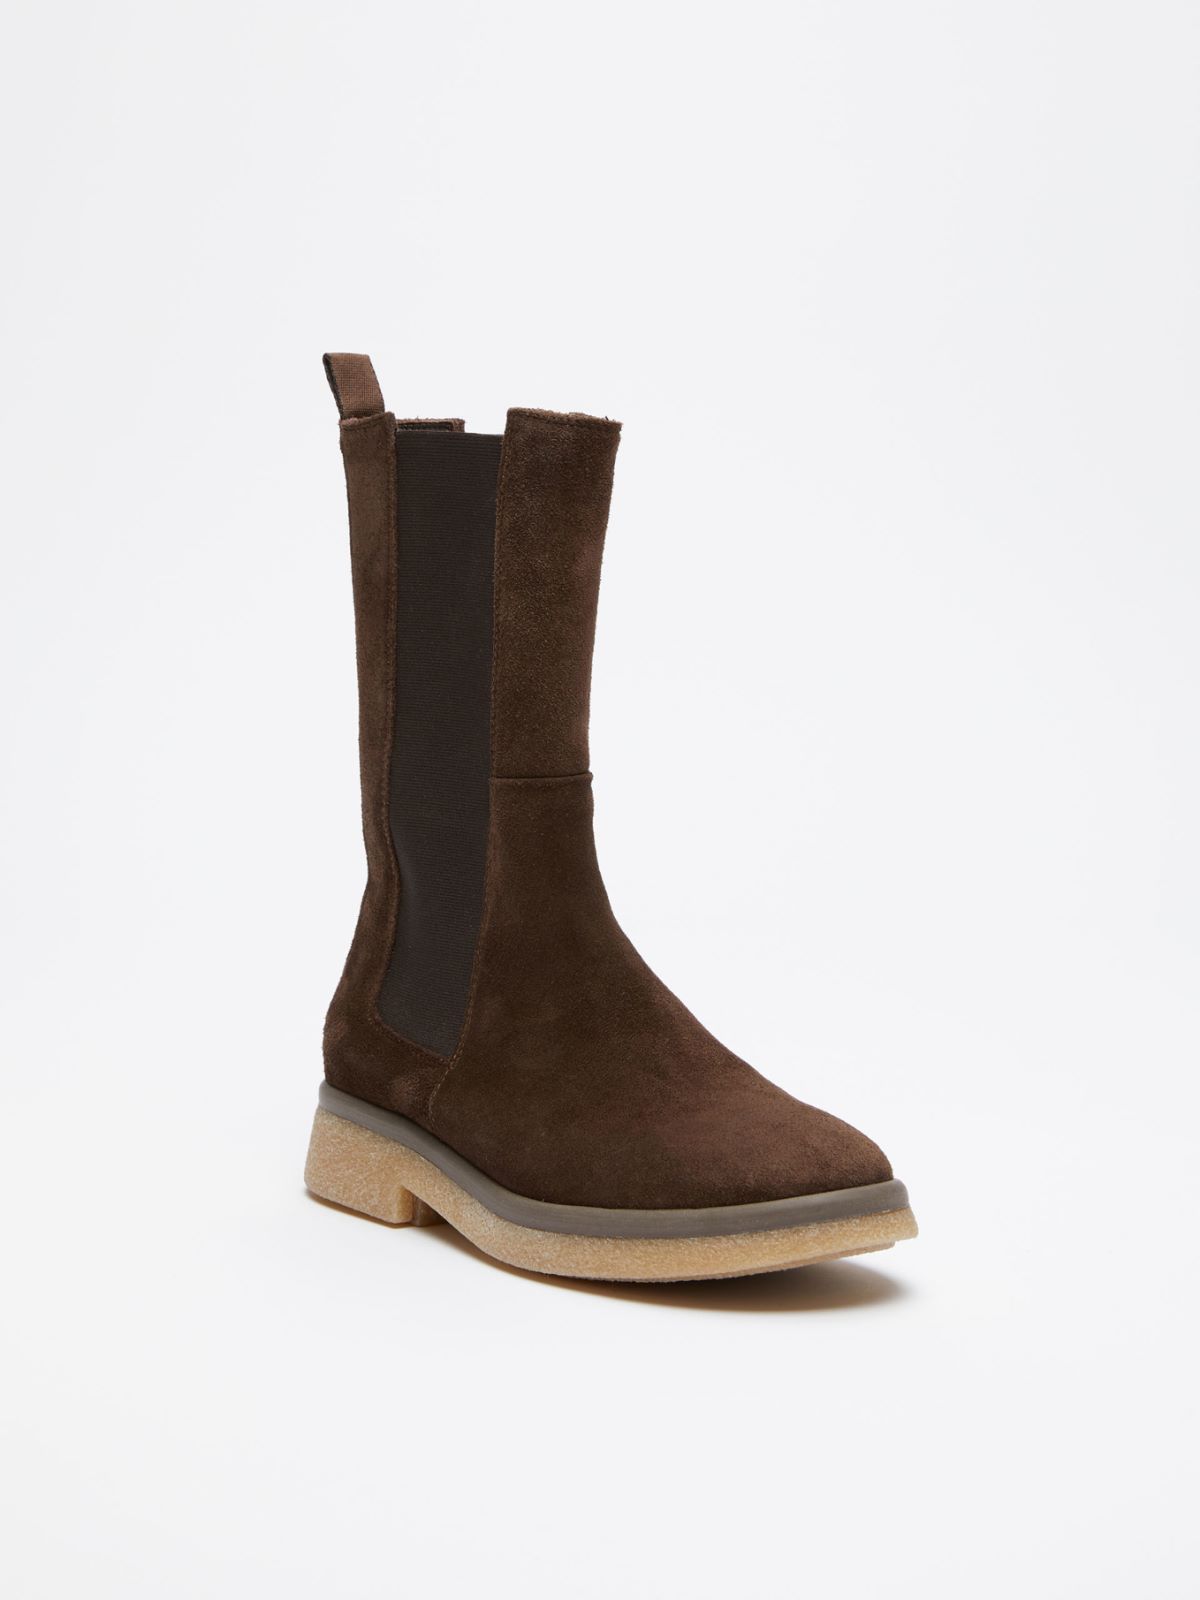 Leather ankle boots - DARK BOWN - Weekend Max Mara - 2